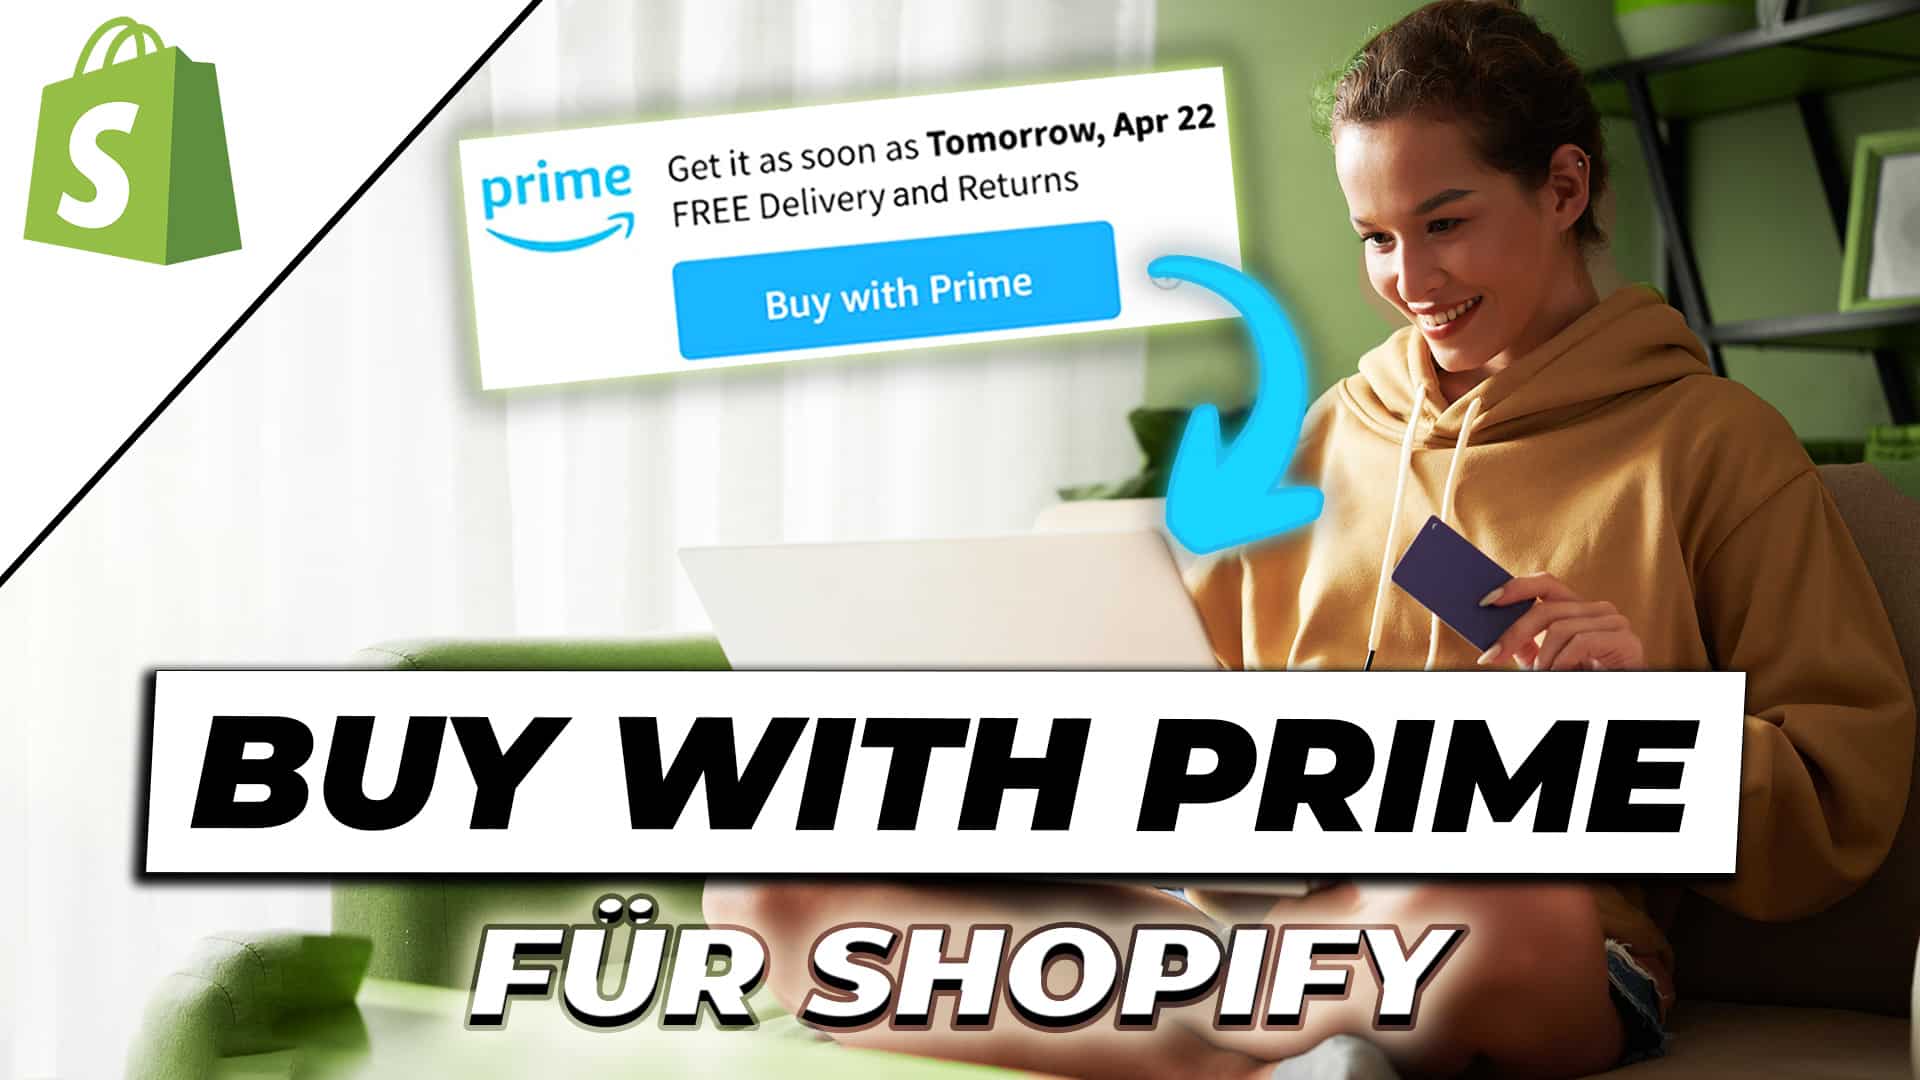 Shopify “Buy with Prime” – Amazon Feature in Shopify nun nutzbar